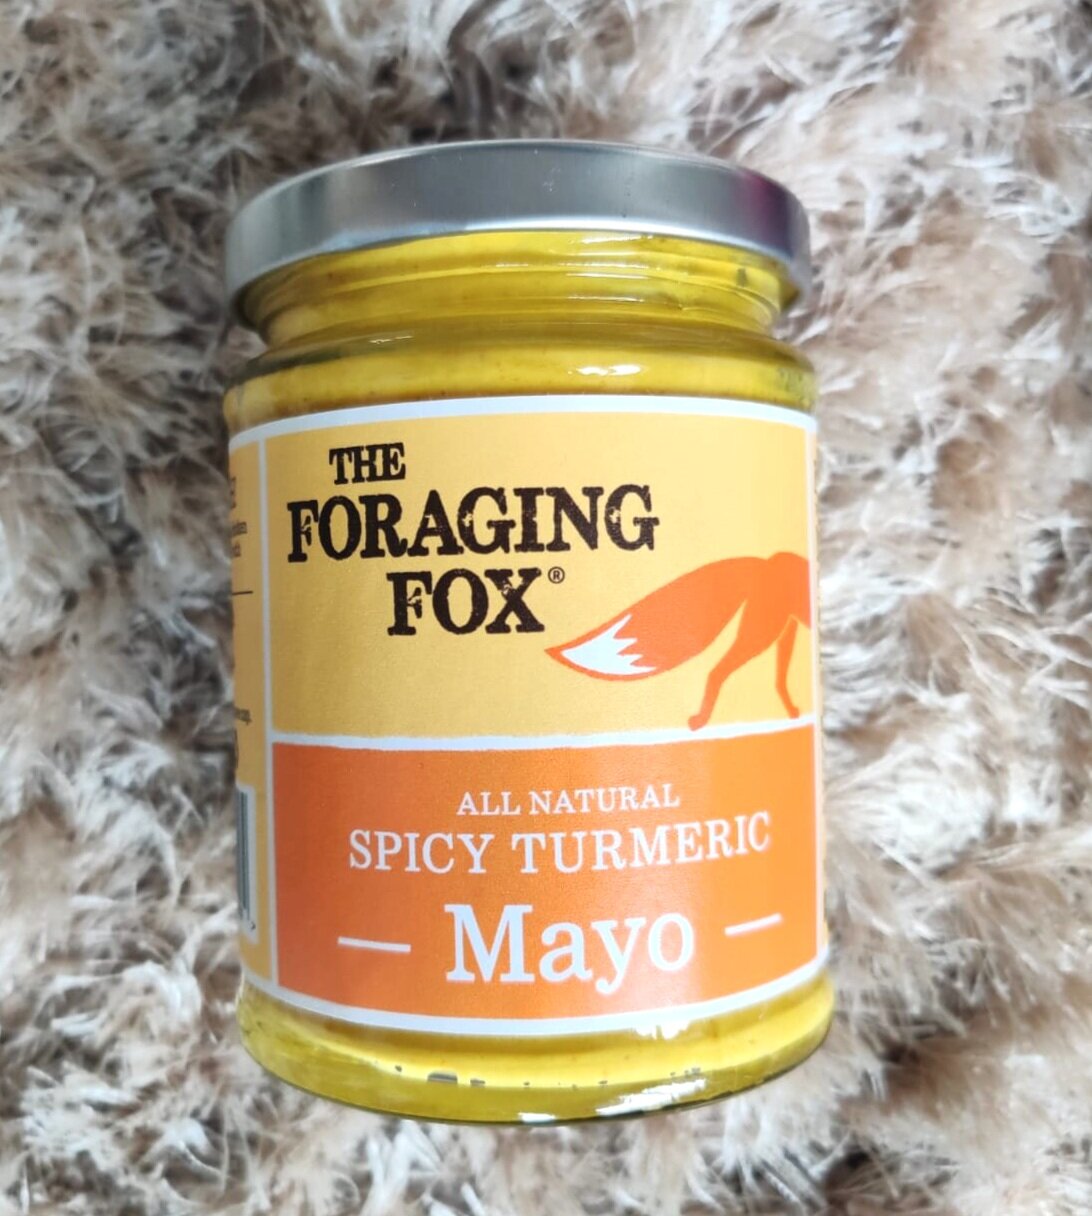 The foraging fox